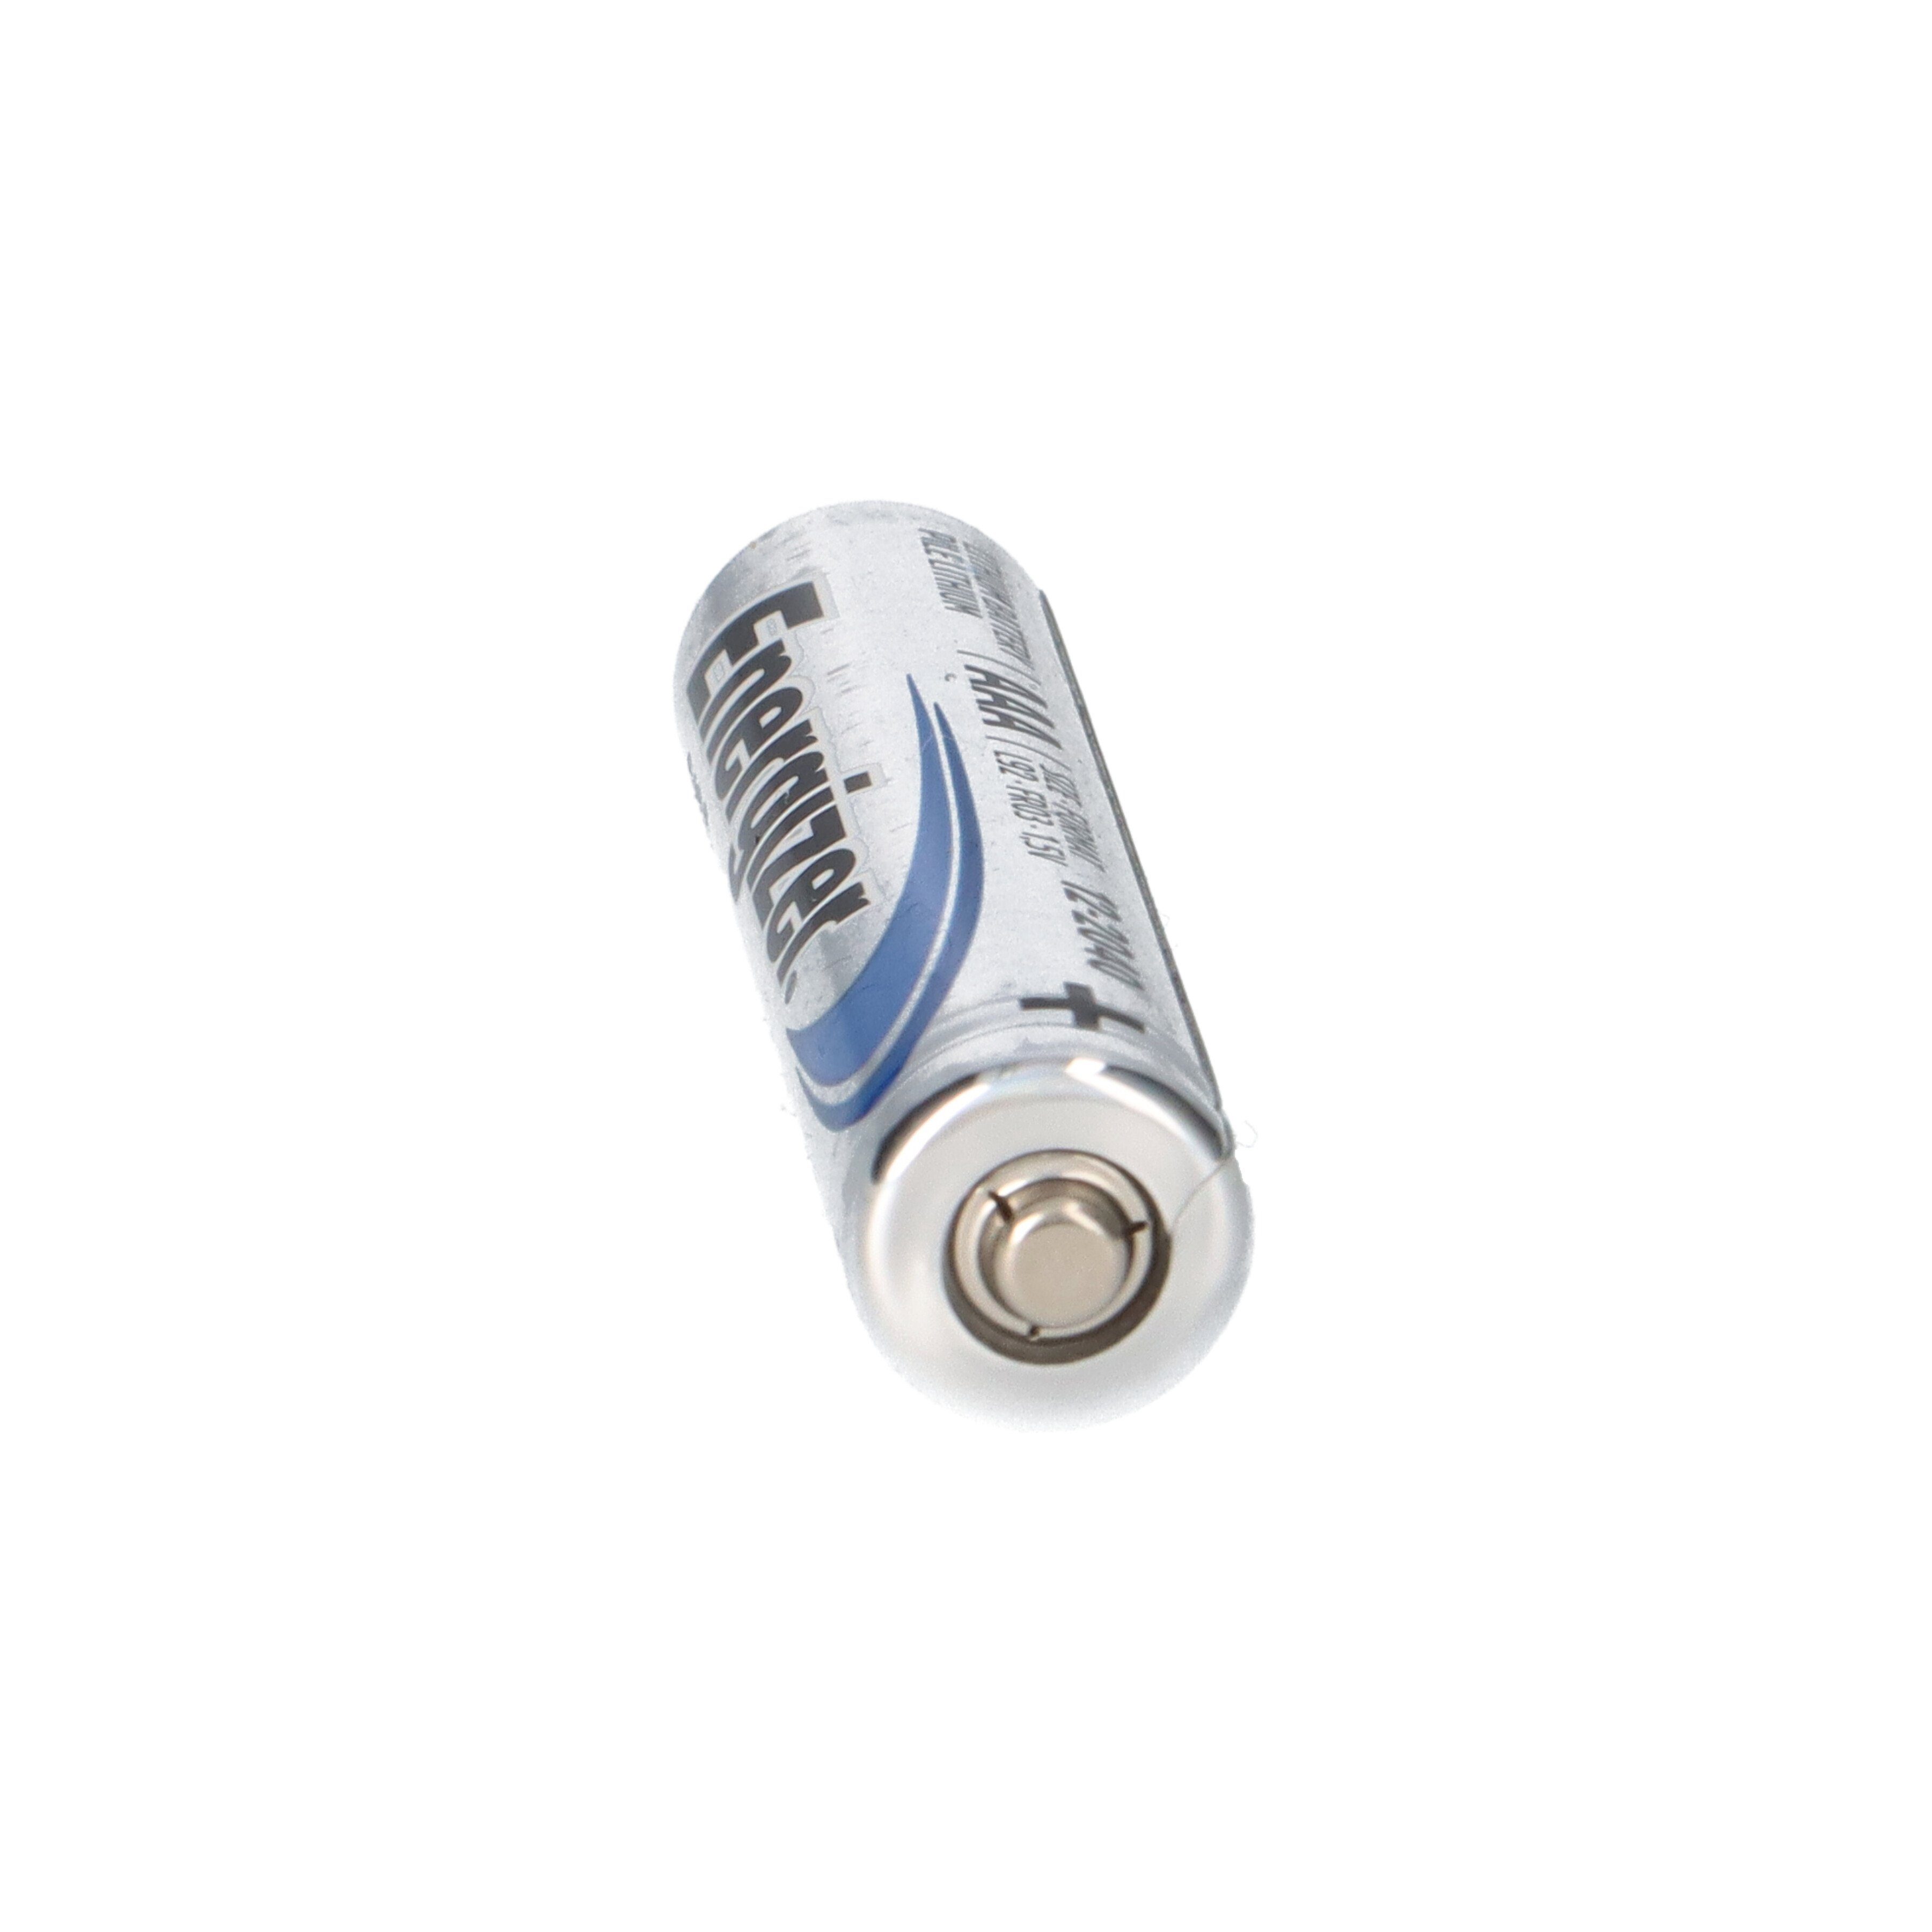 LR03 Batterie Energizer Lithium Batterie Ultimate Micro L92 120x AAA Energizer 1.5V